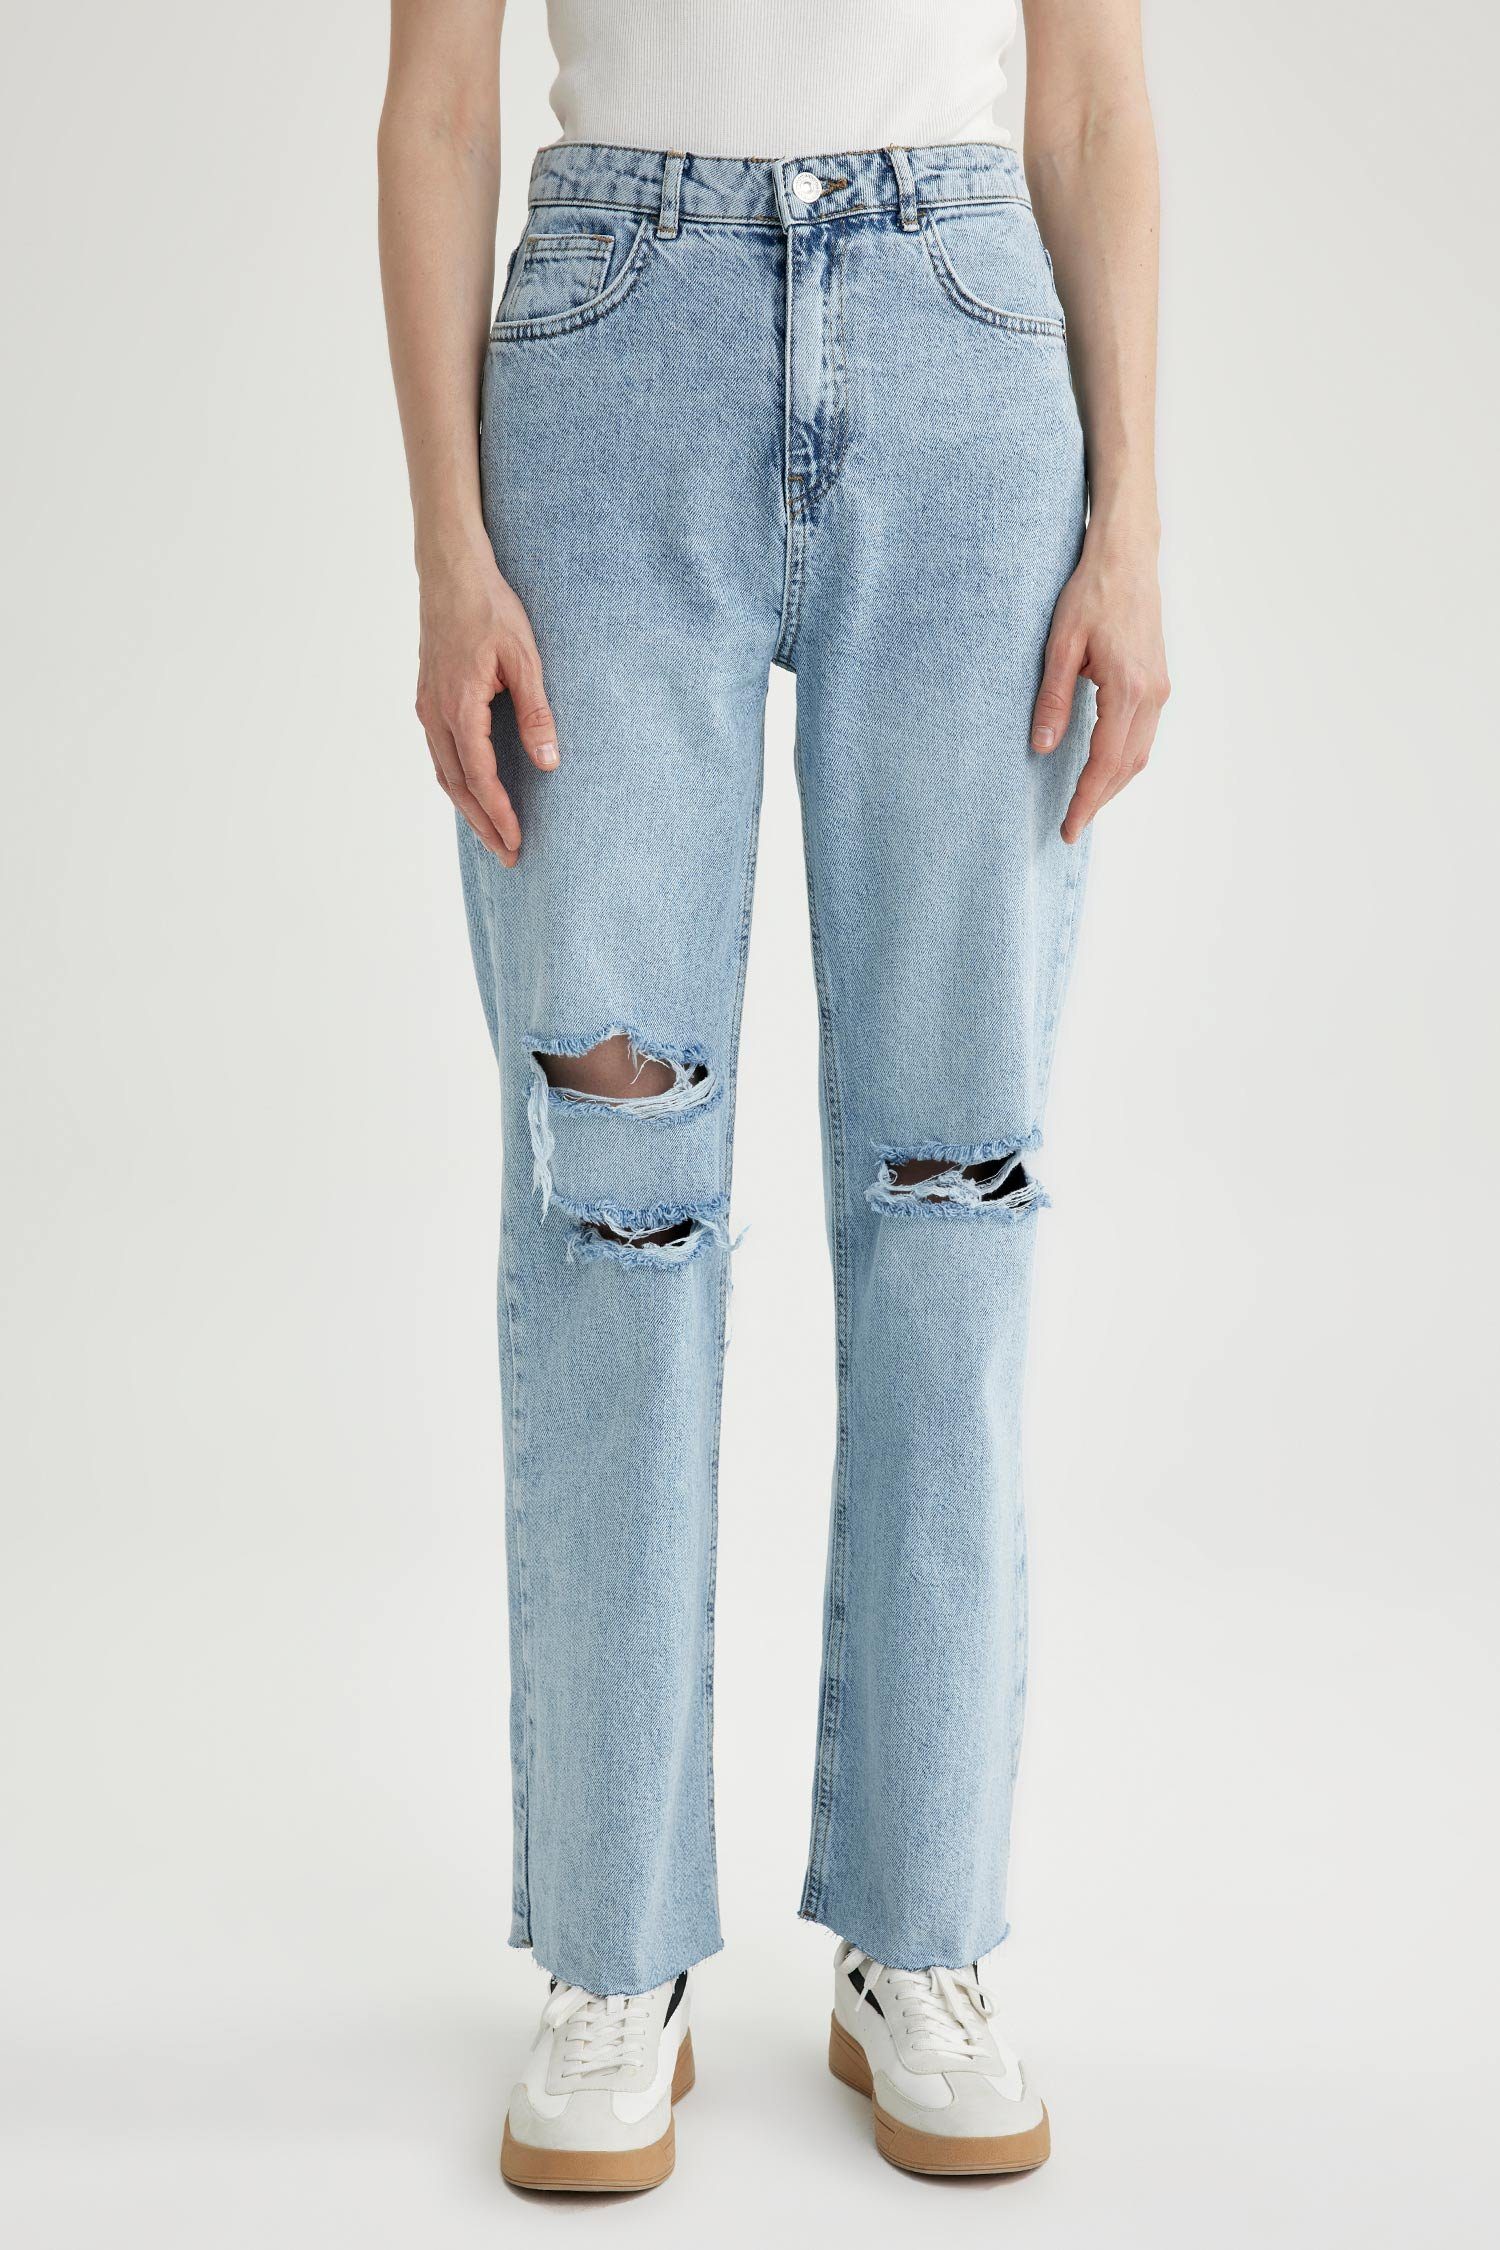 WIDE 90'S Relax-fit-Jeans Relax-fit-Jeans DeFacto LEG